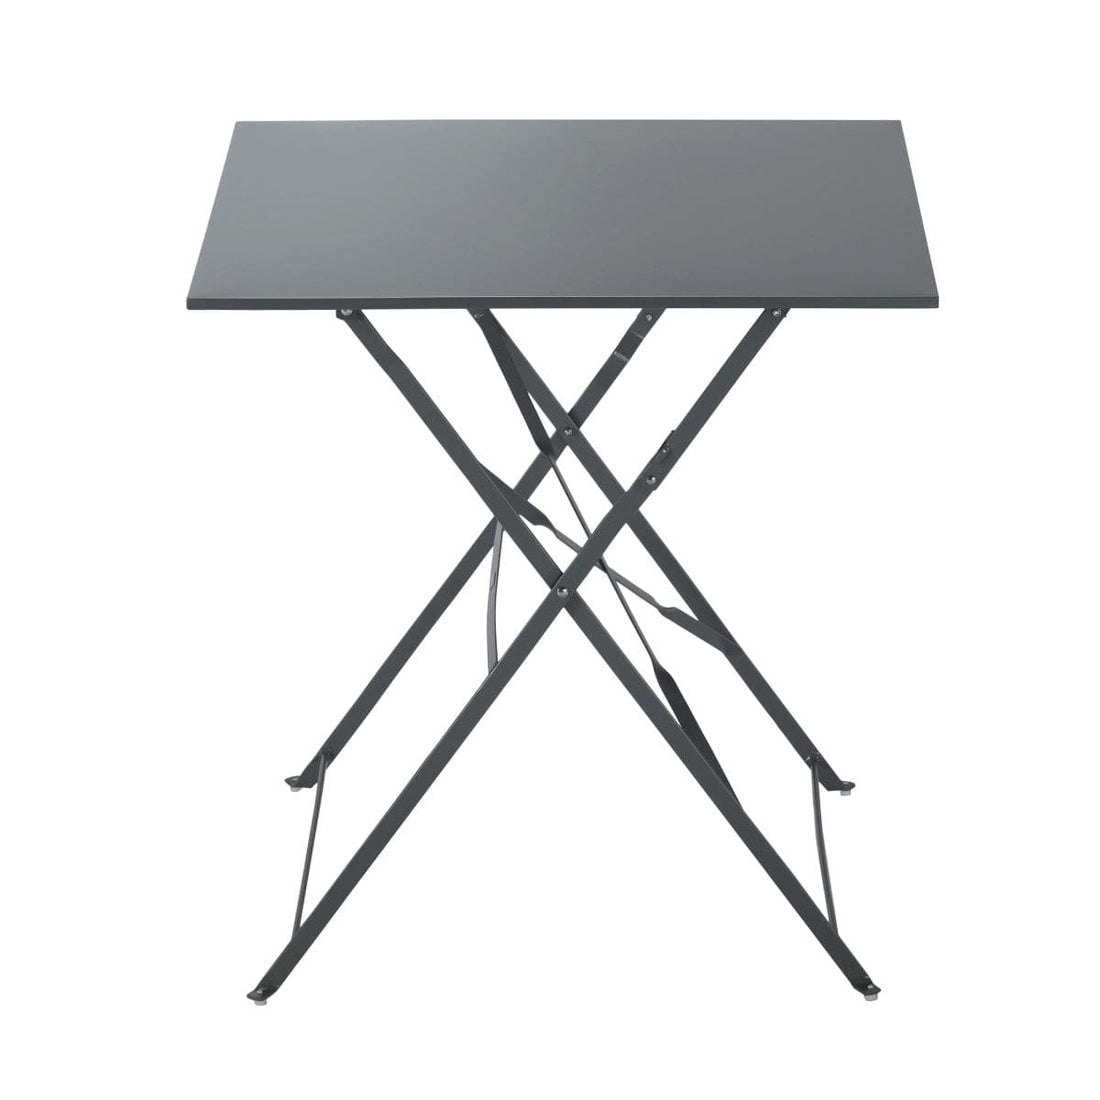 FLORA NATERIAL - Folding Table 2 seater Square Steel - 70x70xh71 - best price from Maltashopper.com BR500009512